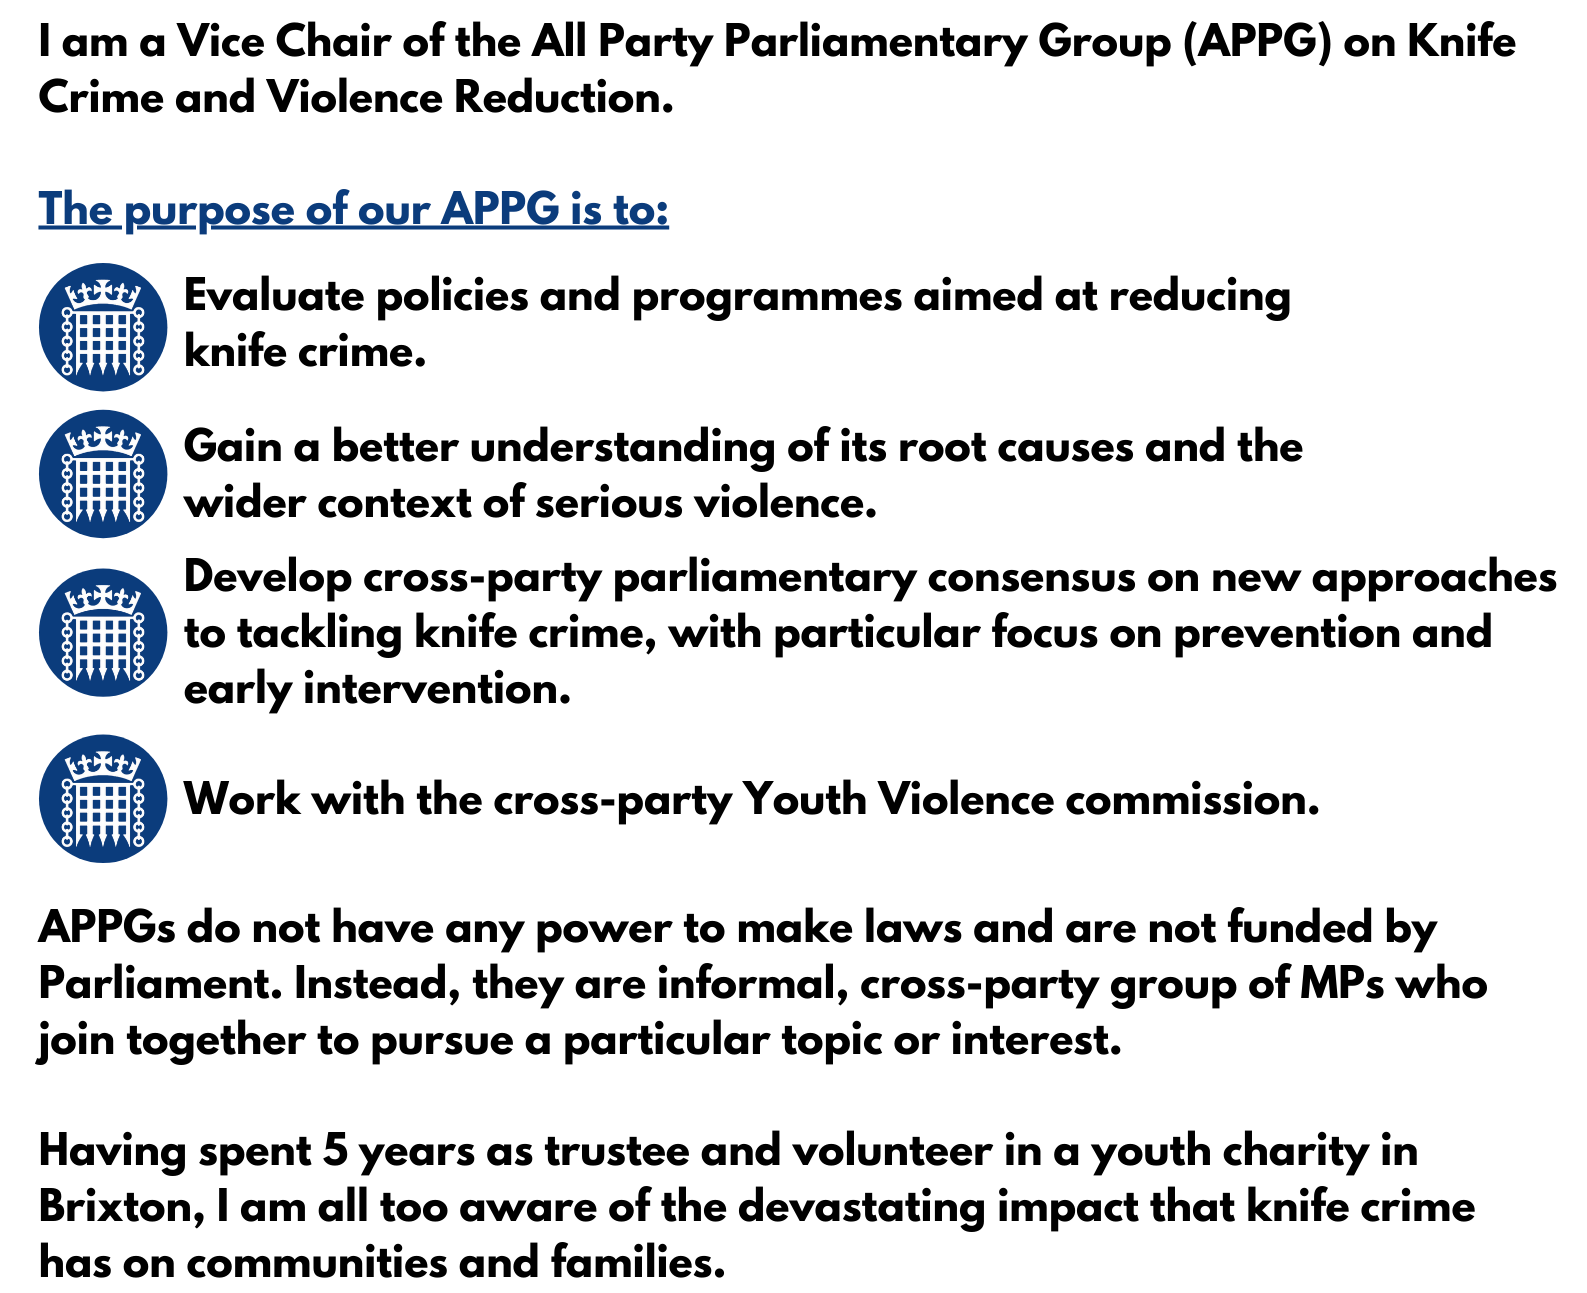 All Party Parliamentary Group on Knife Crime and Violence Reduction